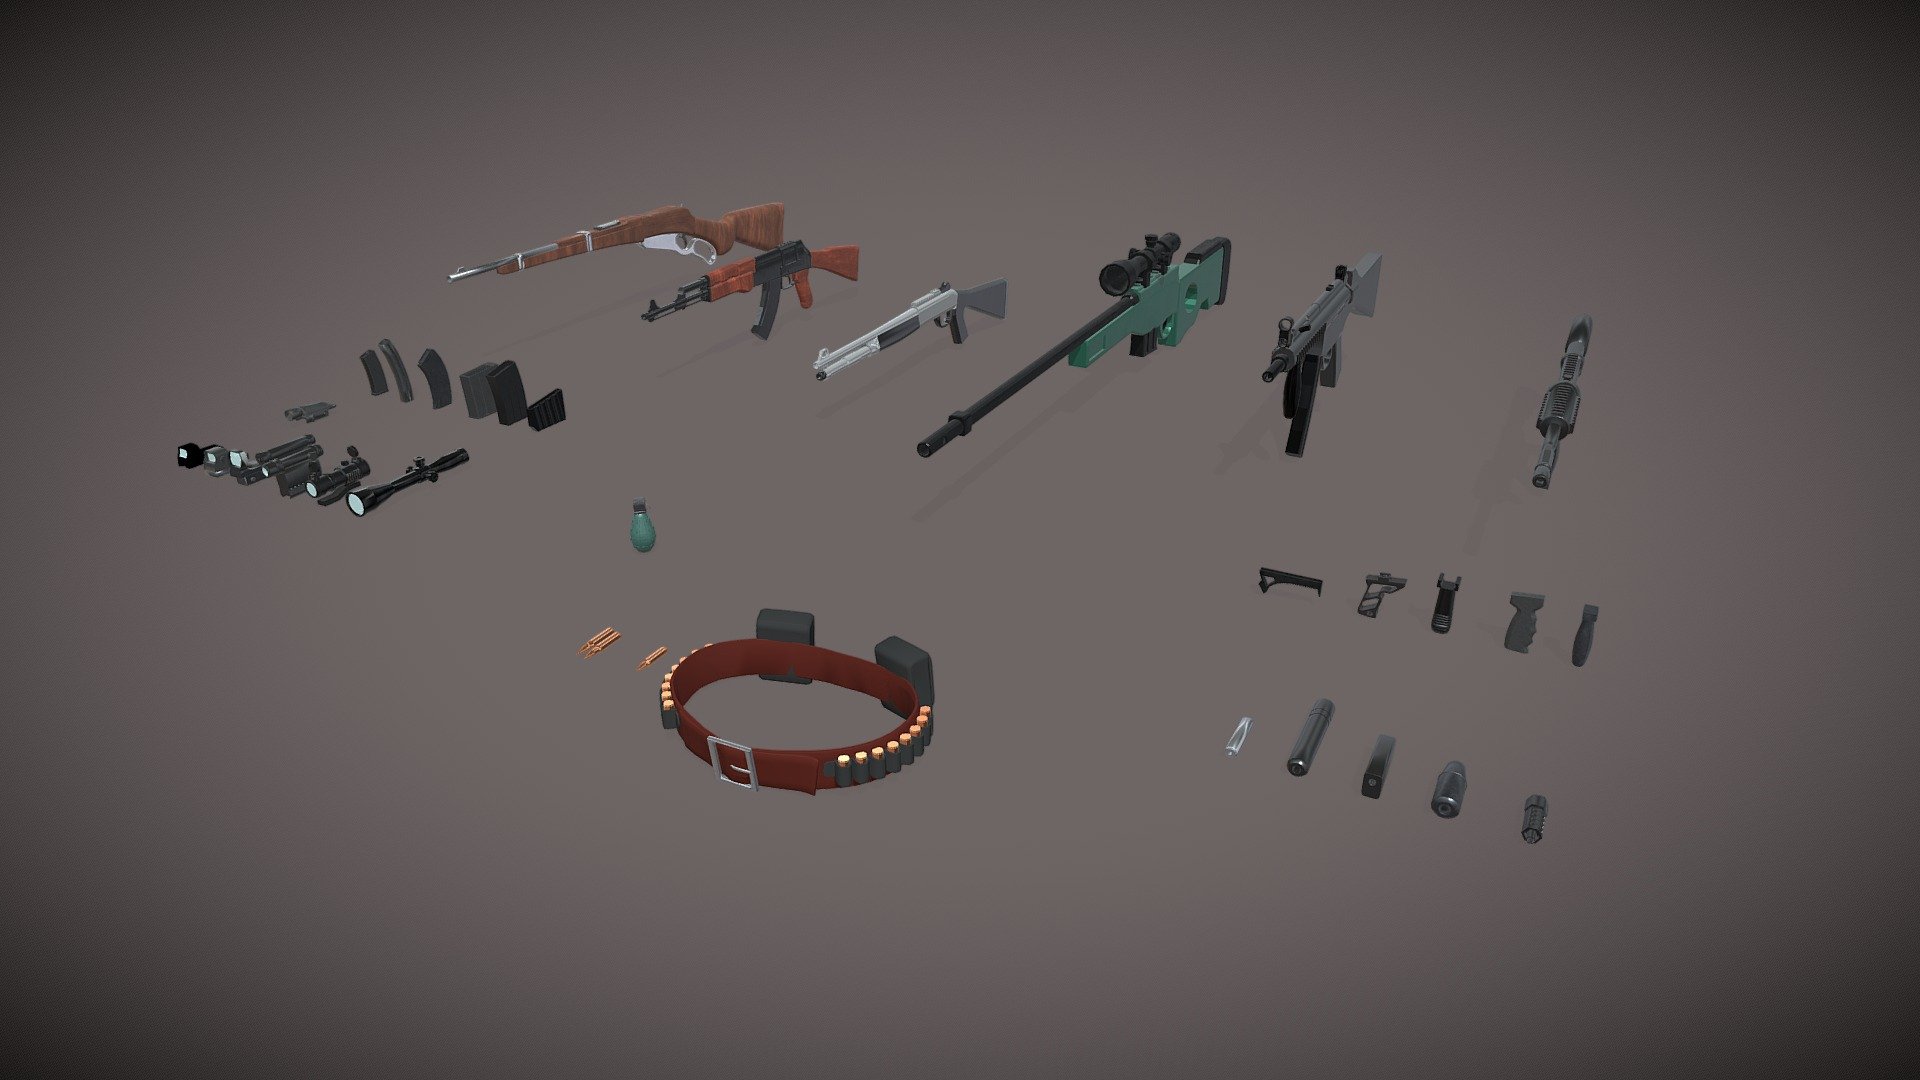 There is a wealth of gun with separate parts and other weapons used in the game of shooting or hunting.
-Guns
-Bullets
-bomb
-Grips
-Bullet holder etc.

All models are fully unwrapped. It pack have textures. you can use directly.

If you have any suggetions or query for this pack, you can contact us on skype : vasundhara.vision 
Enjoy!
Welcome Feedback:) - Gun Weapon Assets - 3D model by Vasundhara Infotech LLP (@vasundharainfotechllp) 3d model